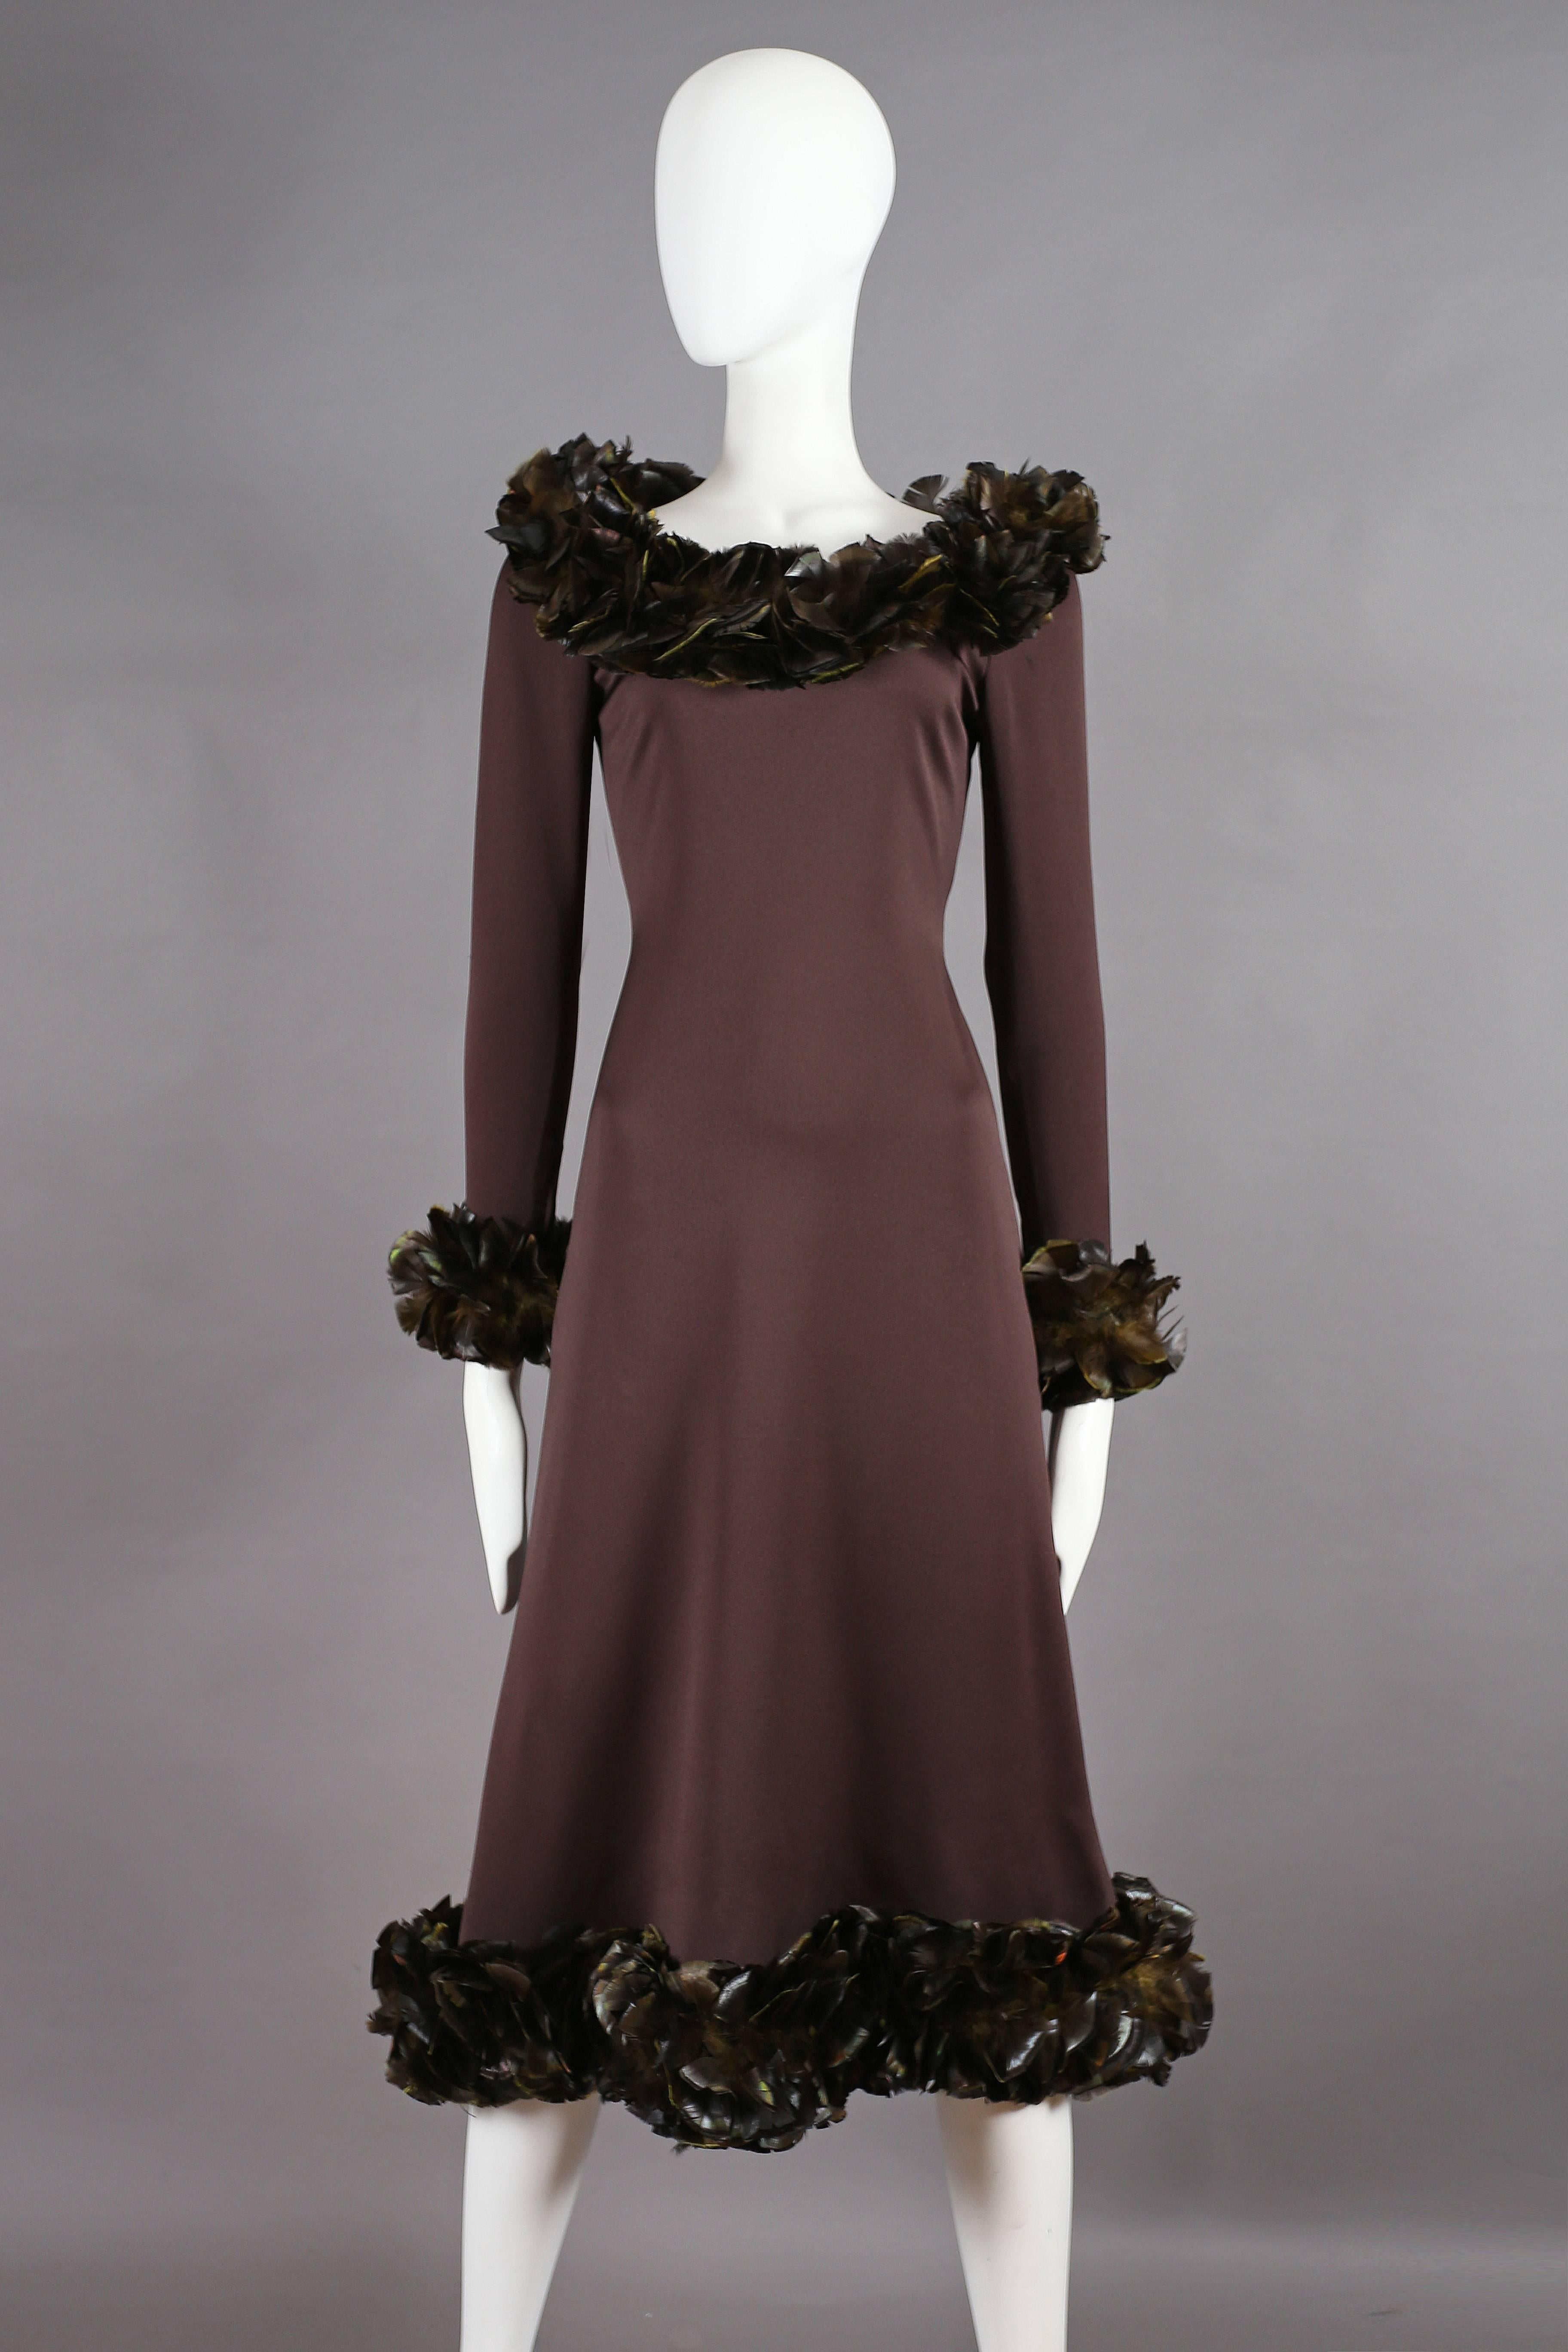 Presenting an exceptional Yves Saint Laurent Haute Couture evening gown from the autumn-winter collection of 1969. This gown is a true masterpiece crafted from luxurious brown silk crepe, exuding elegance and sophistication.

Adding to its allure,